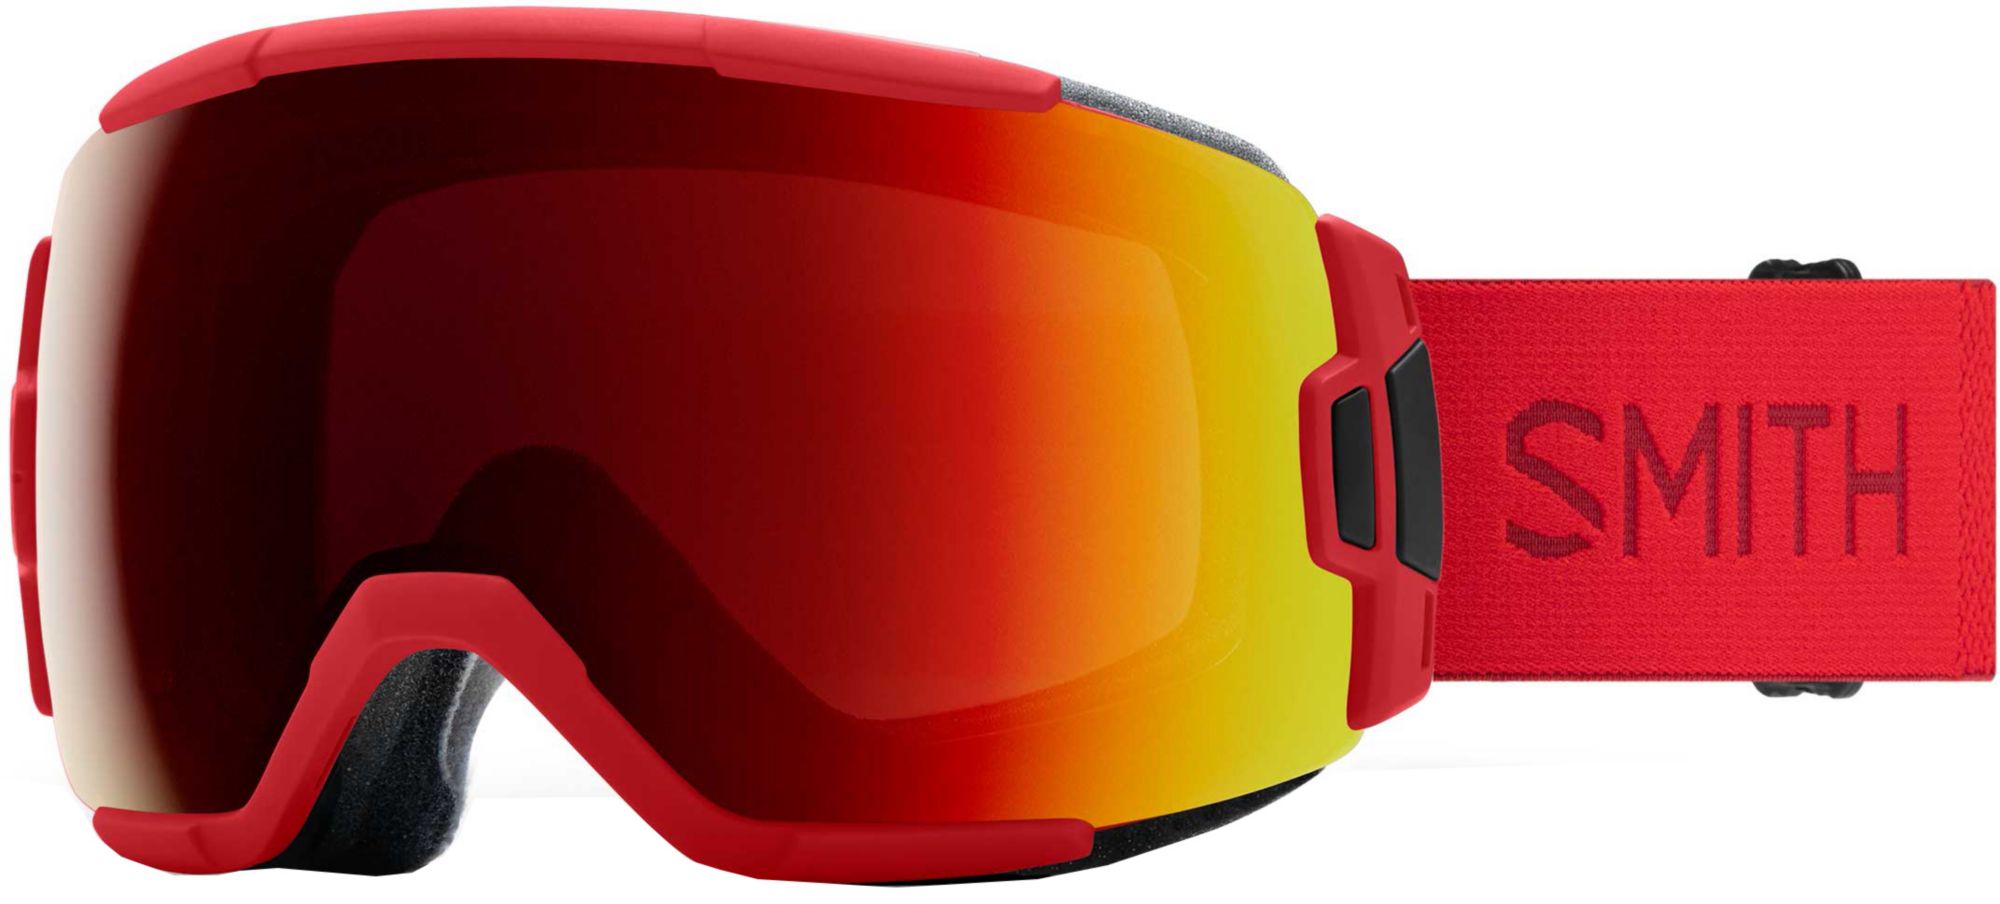 SMITH Adult Vice Snow Goggles, Fire